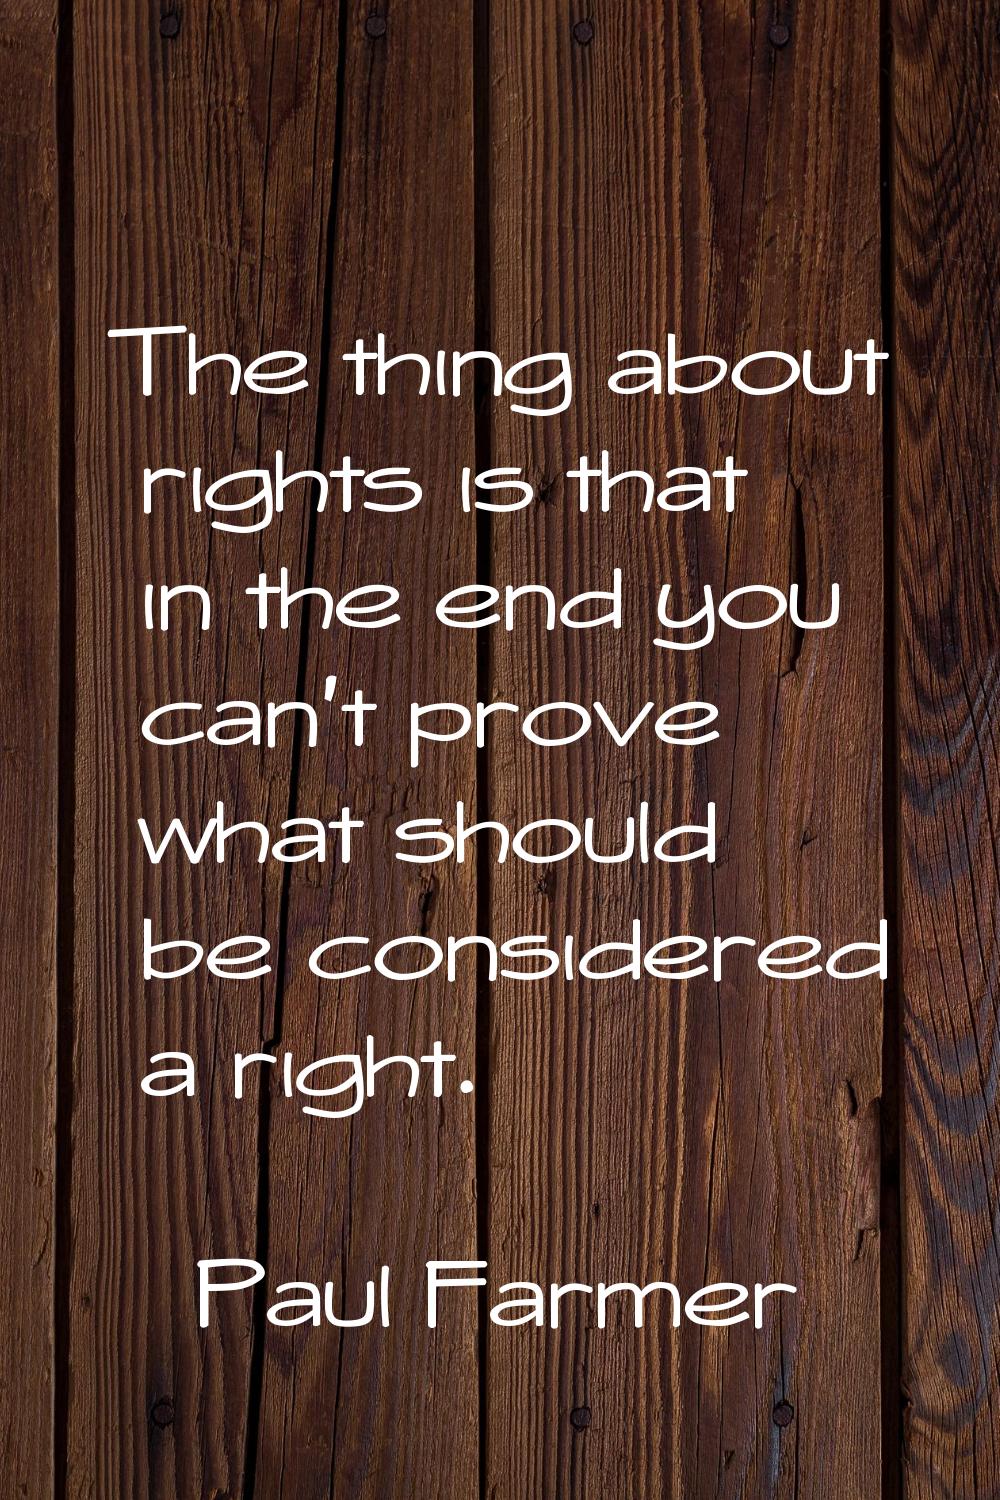 The thing about rights is that in the end you can't prove what should be considered a right.